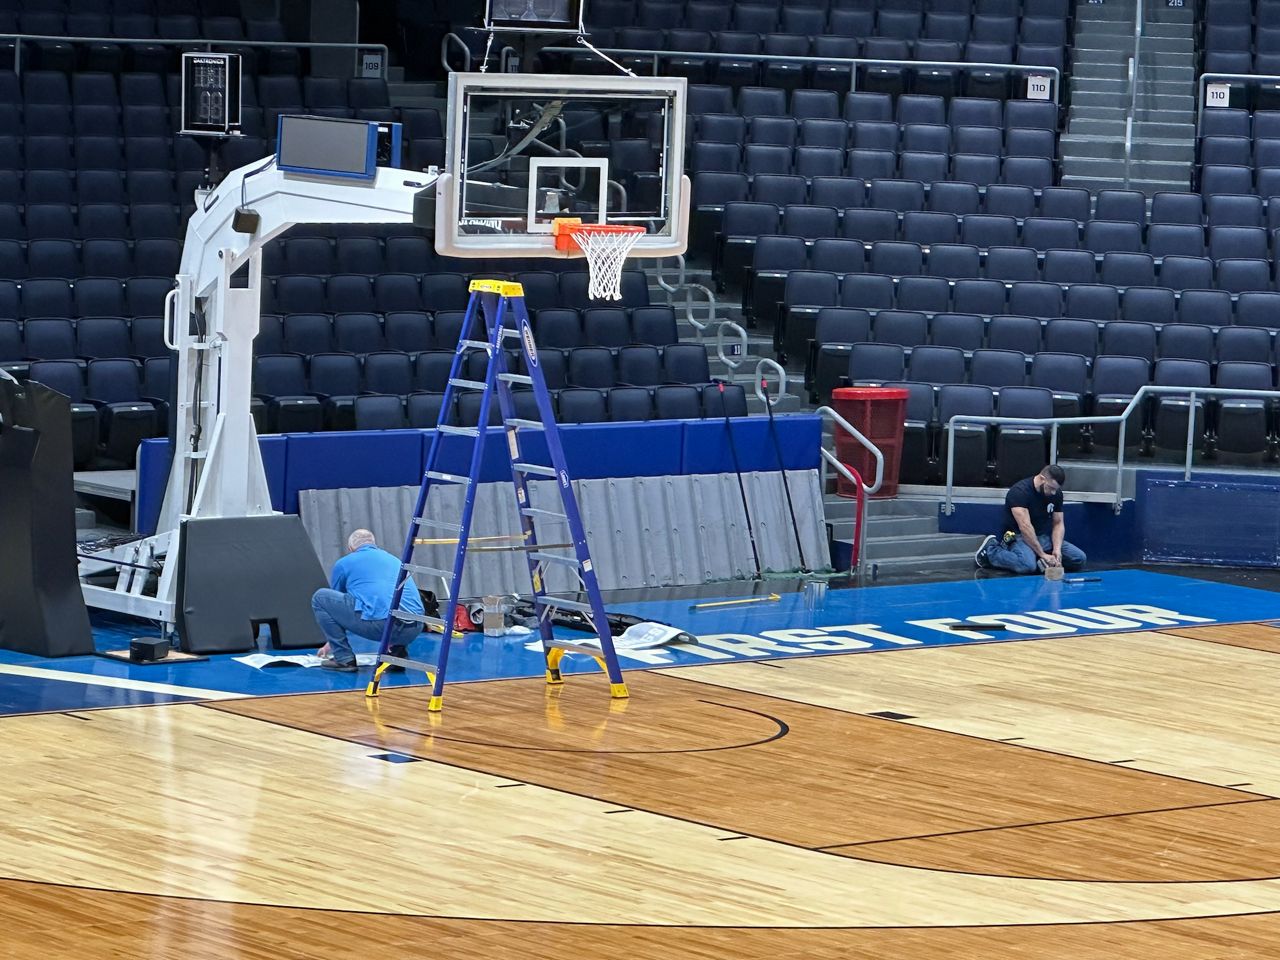 A team of about 100 people worked Sunday to transform UD Arena into the site of the First Four round of the NCAA Tournament. Work included replacing the floor and adding NCAA signage throughout the arena. (Michelle Alfini/Spectrum News 1)